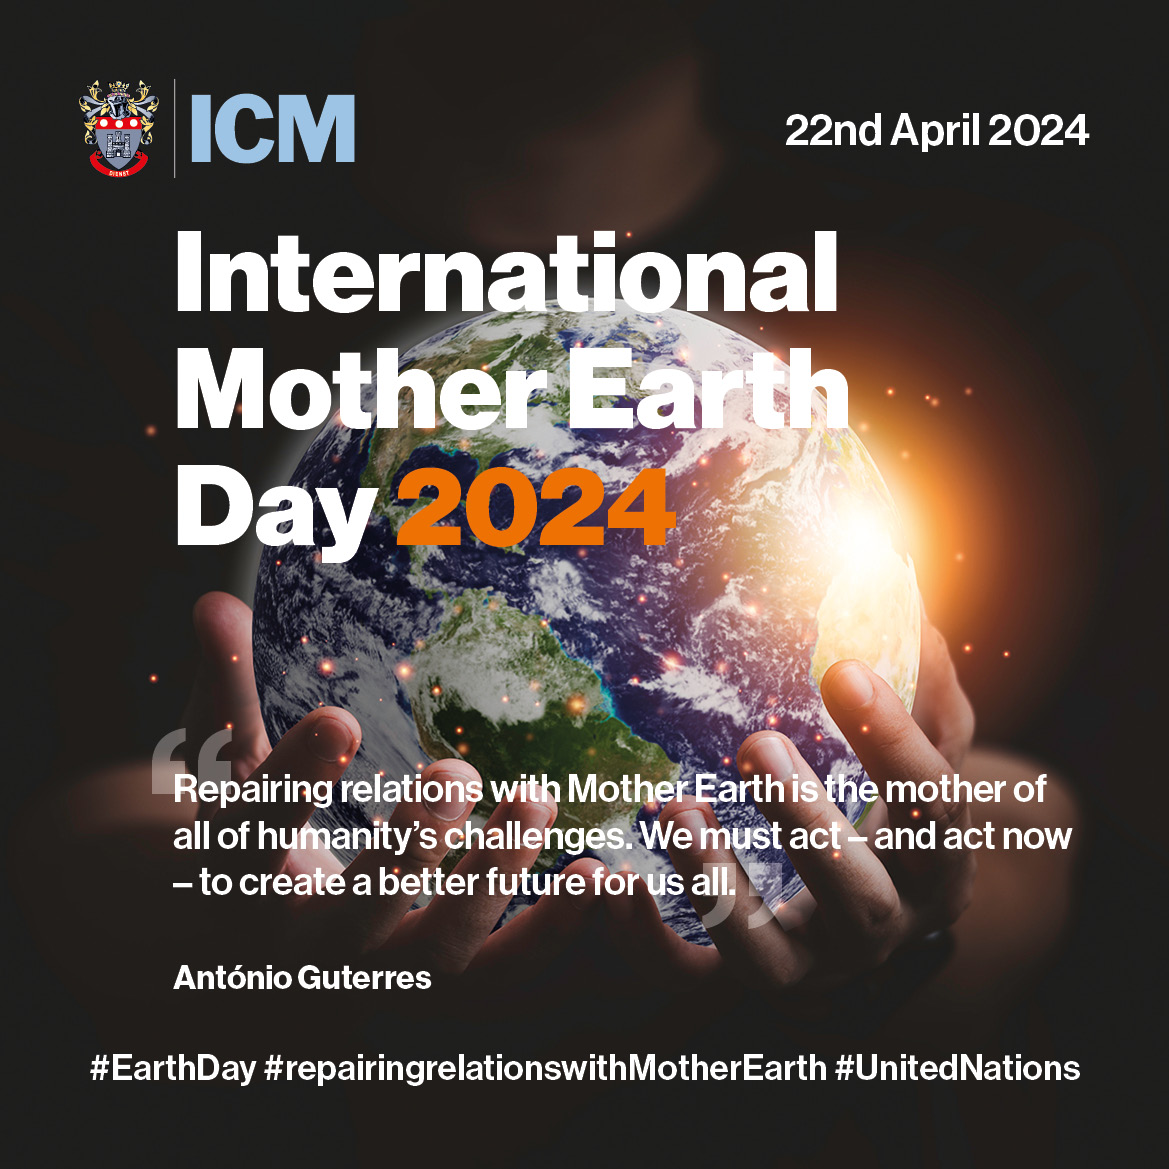 Today is International Mother Earth Day.
Nature is suffering and we need to act now to repair our damaged ecosystems, and create more sustainable economies to improve the health of our planet.
un.org/en/observances…

#EarthDay #MotherEarth #harmonywithnature #UnitedNations #ICM